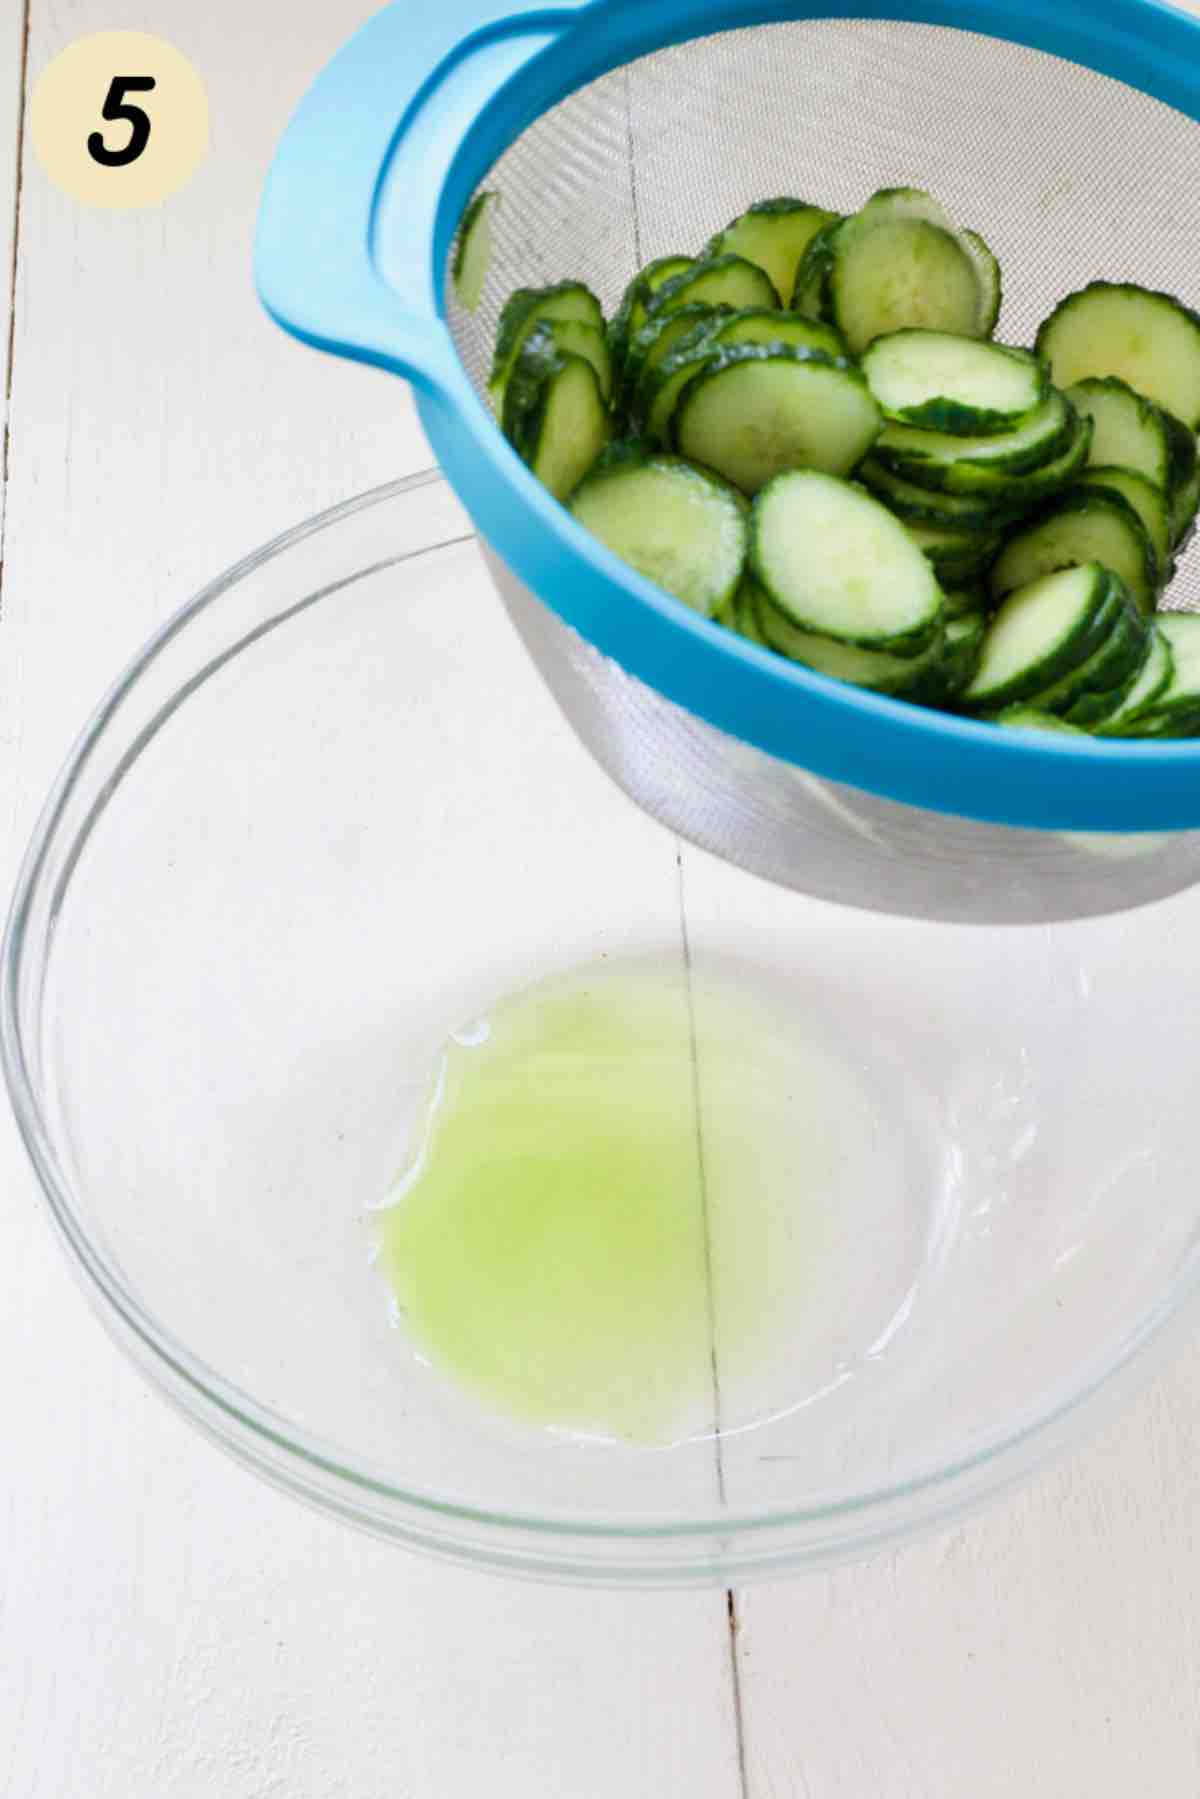 Cucumber water at the bottom of the bowl.